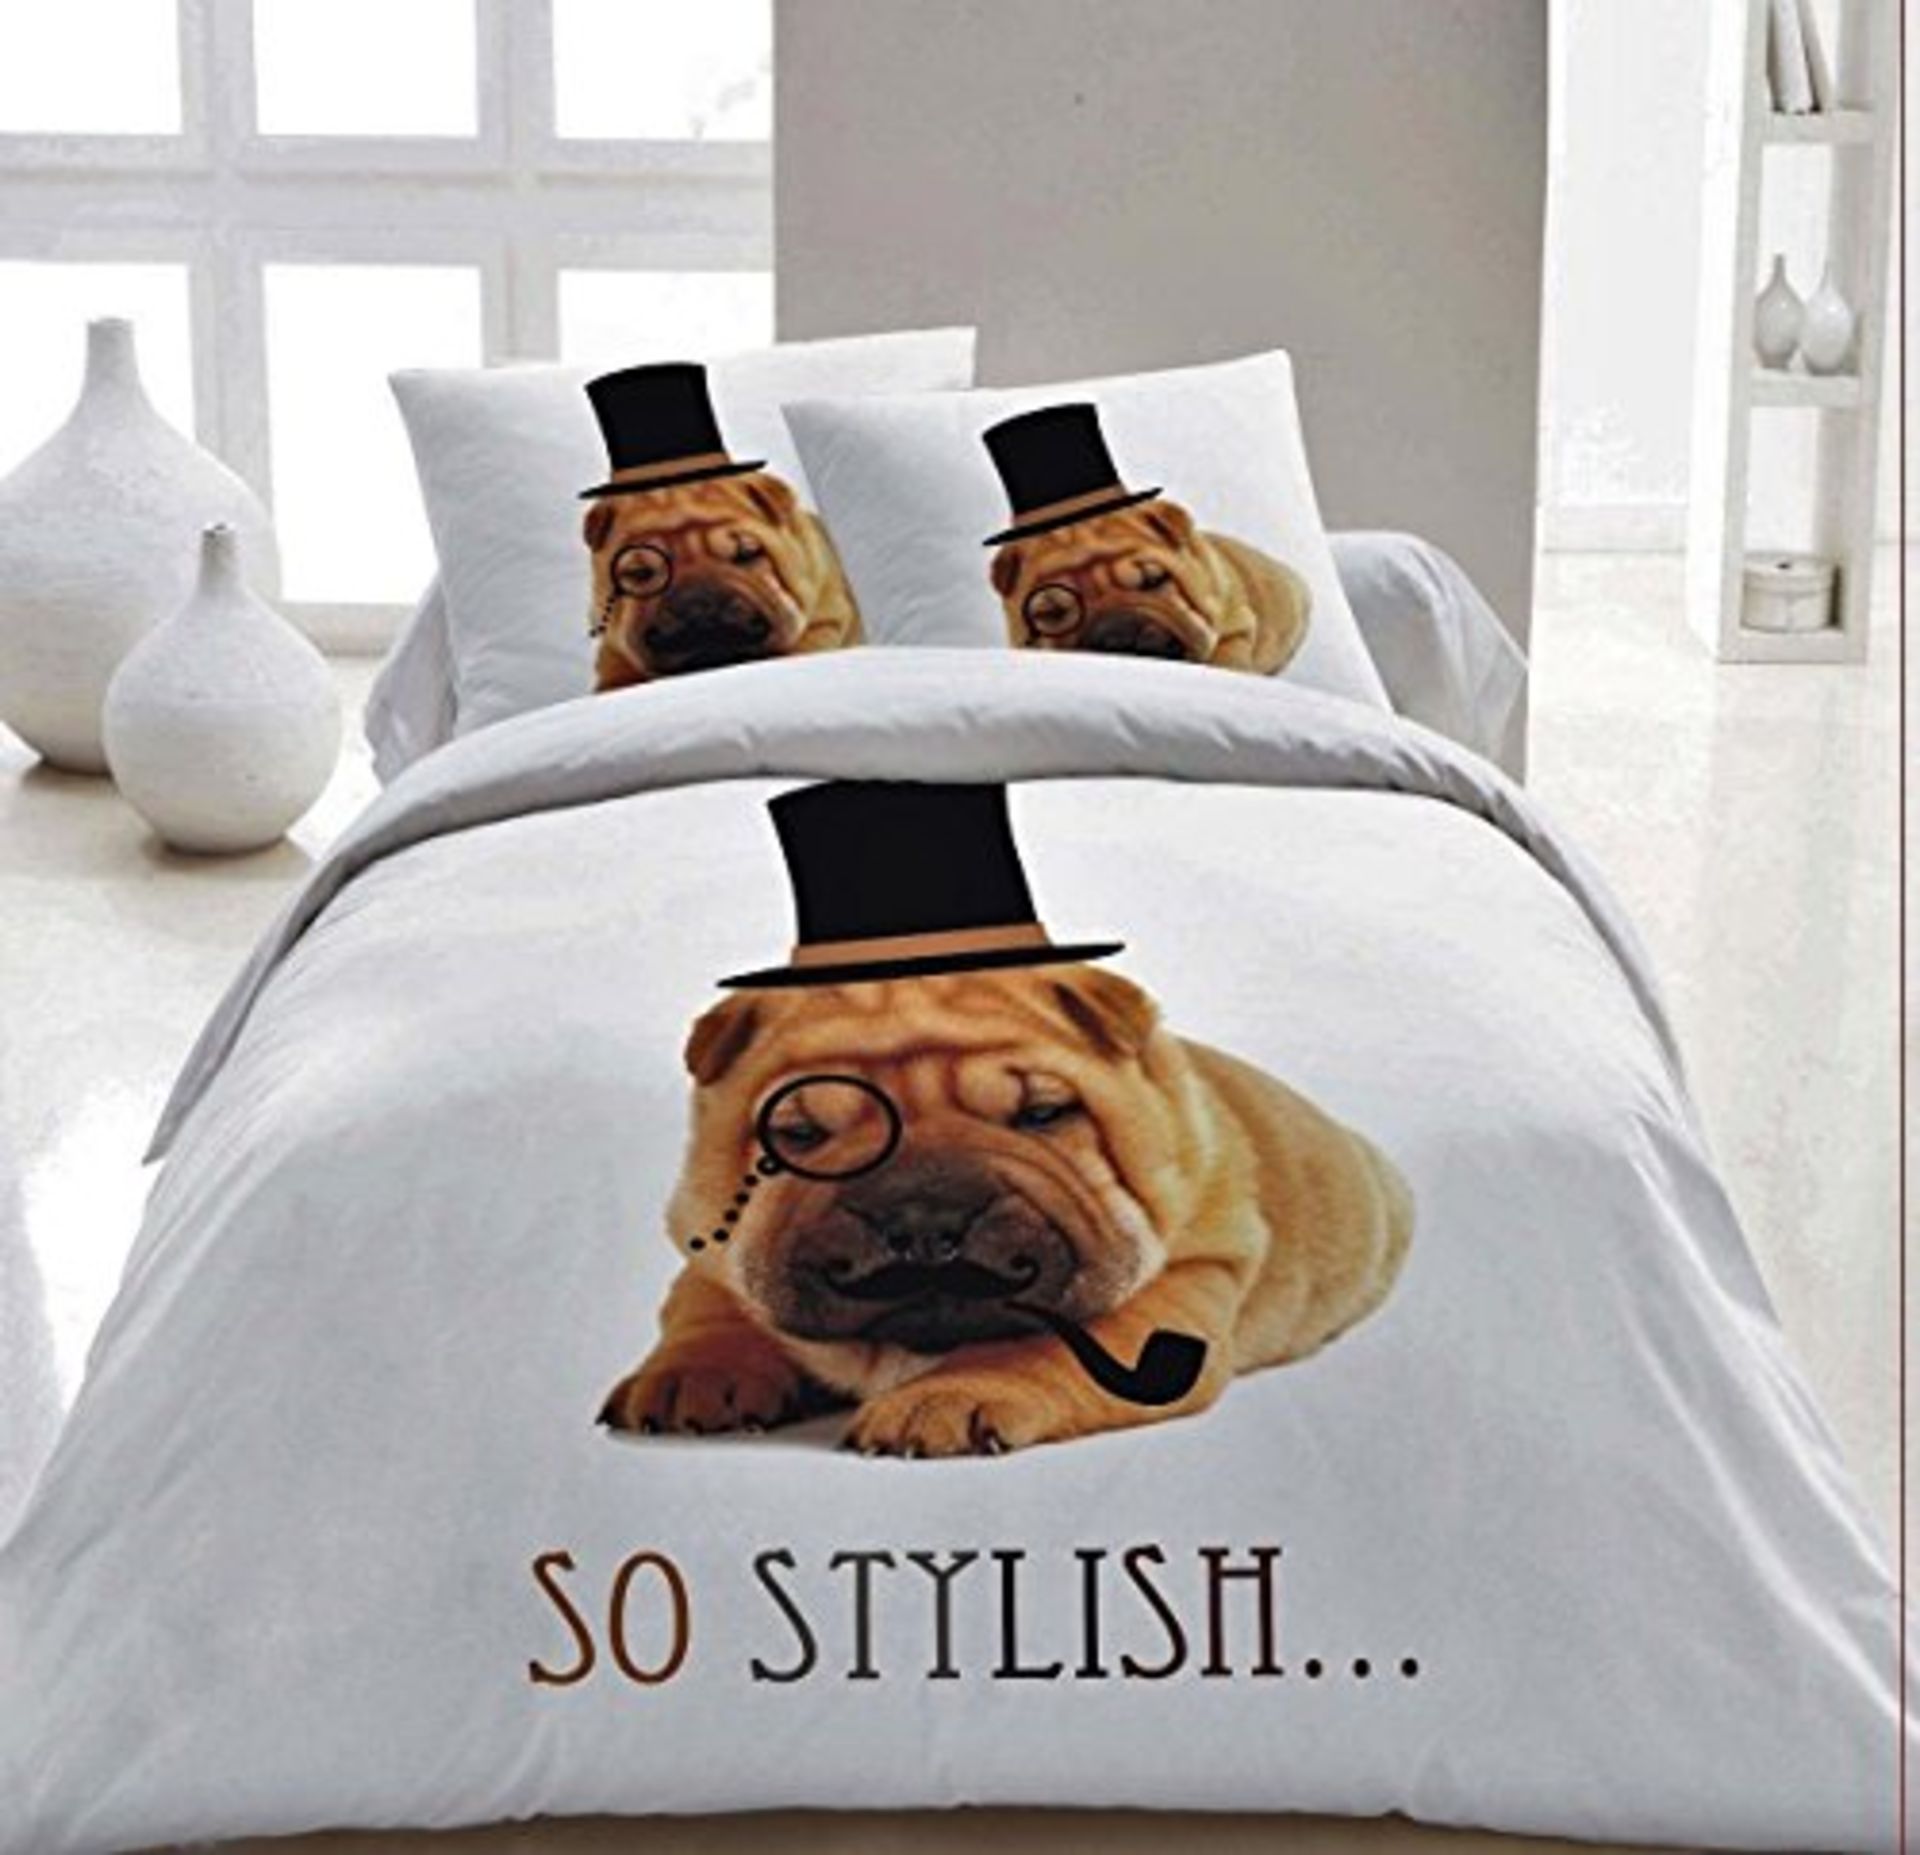 V Brand New Double Size Luxury 3 Piece Duvet Set With 2 Pillow Cases And 3D Dog Picture X 2 YOUR BID